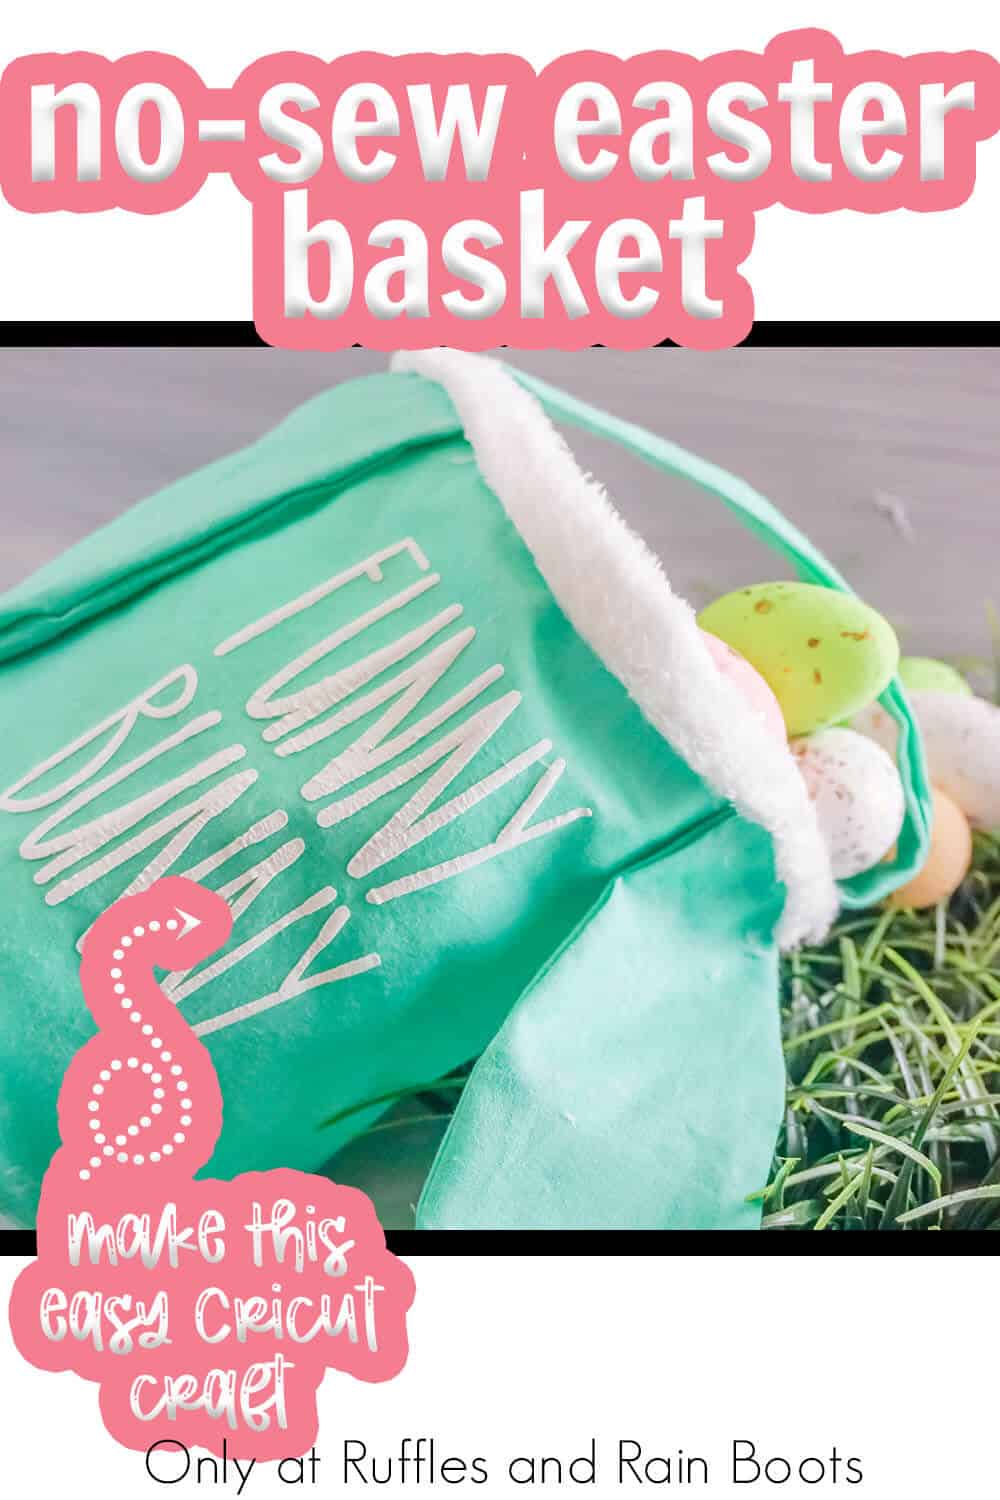 diy easter no-sew basket craft for cricut or silhouette with text which reads no-sew easter basket make this easy cricut craft